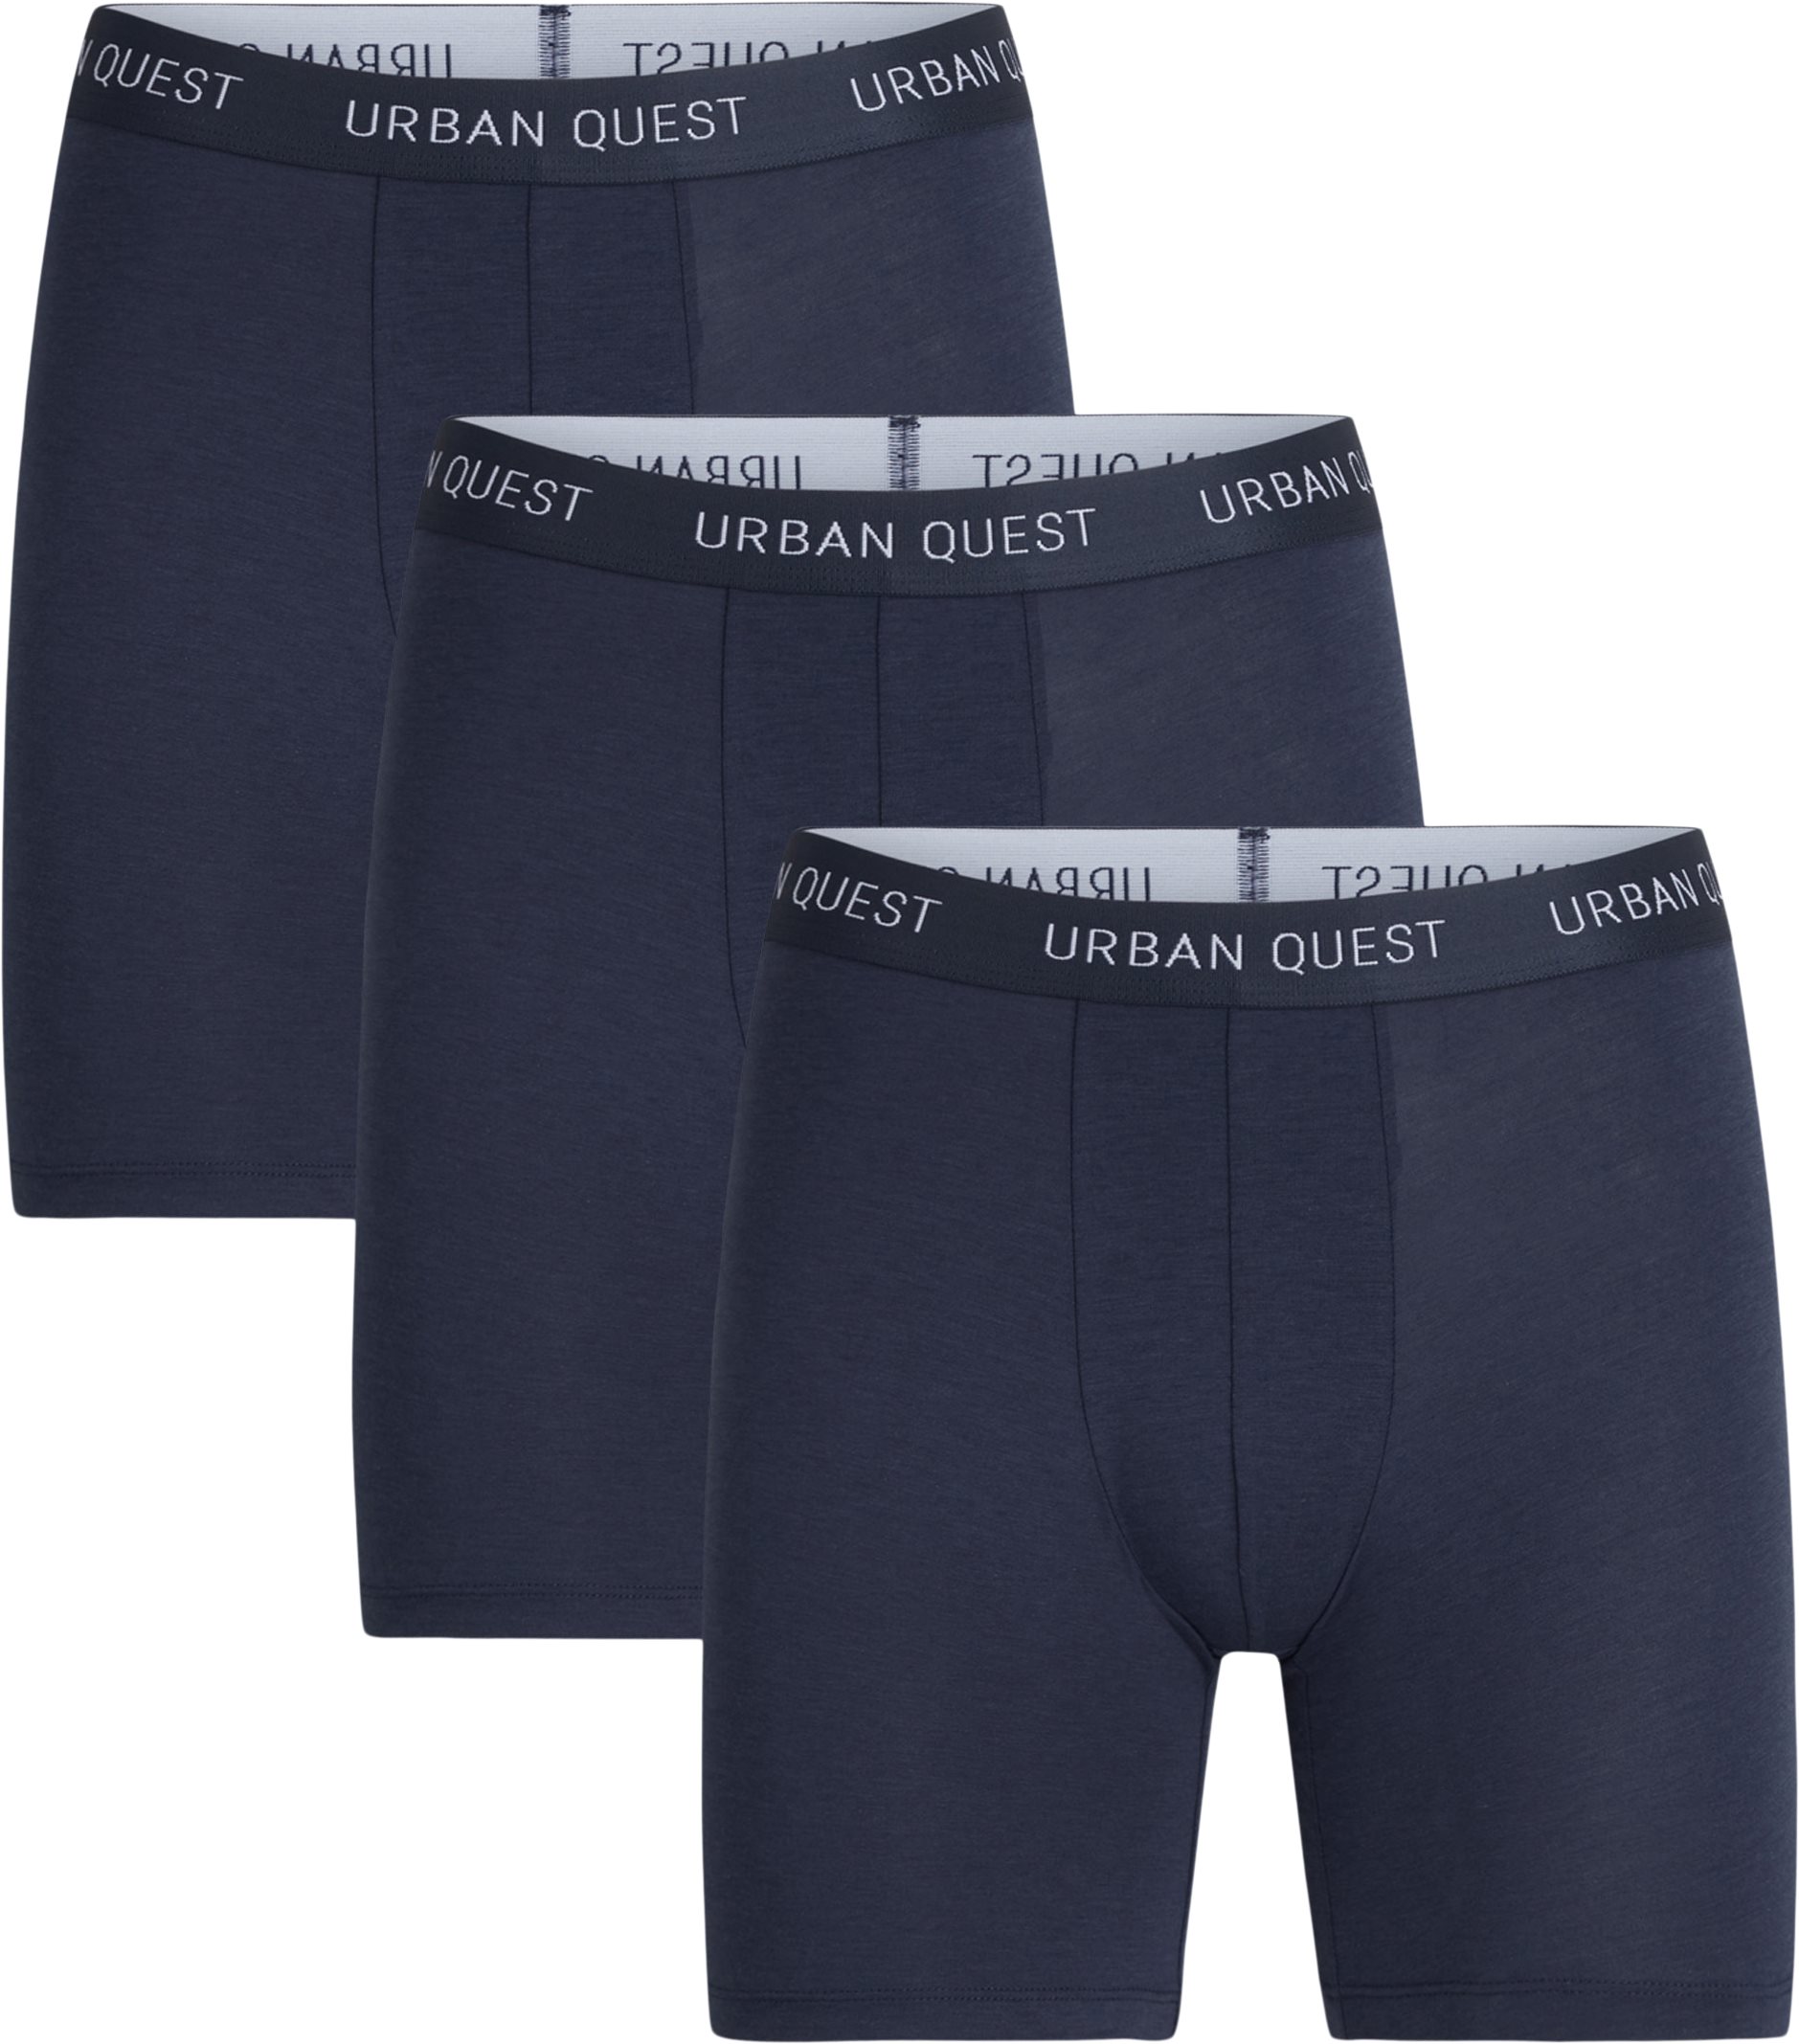 1420 3-PACK LONG LEG BAMBOO TIGHTS Underwear NAVY from URBAN QUEST 40 EUR